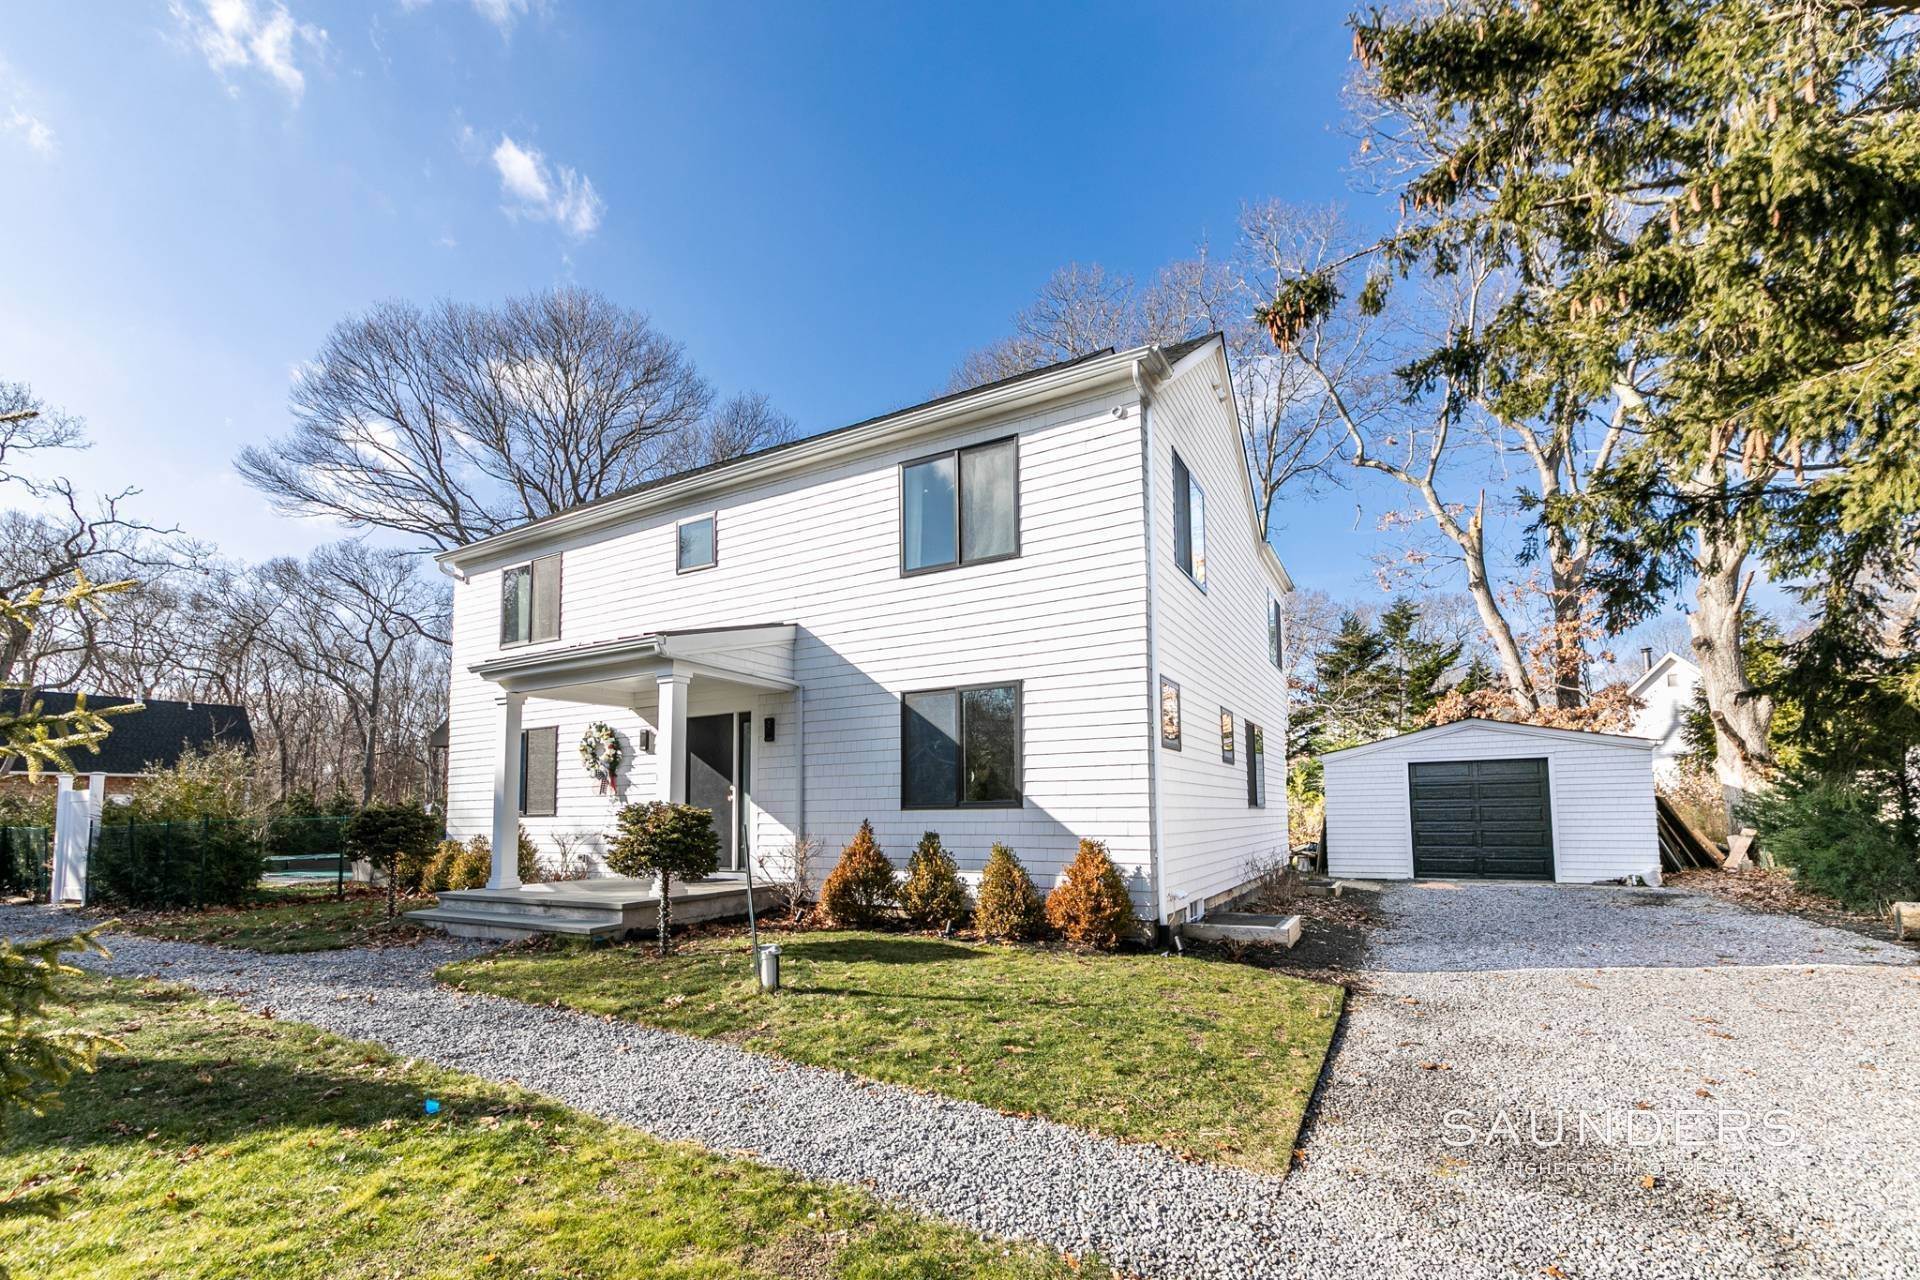 Single Family Homes for Sale at Beautifully Renovated Move-In Ready Home 25 Malone Street, East Hampton, NY 11937